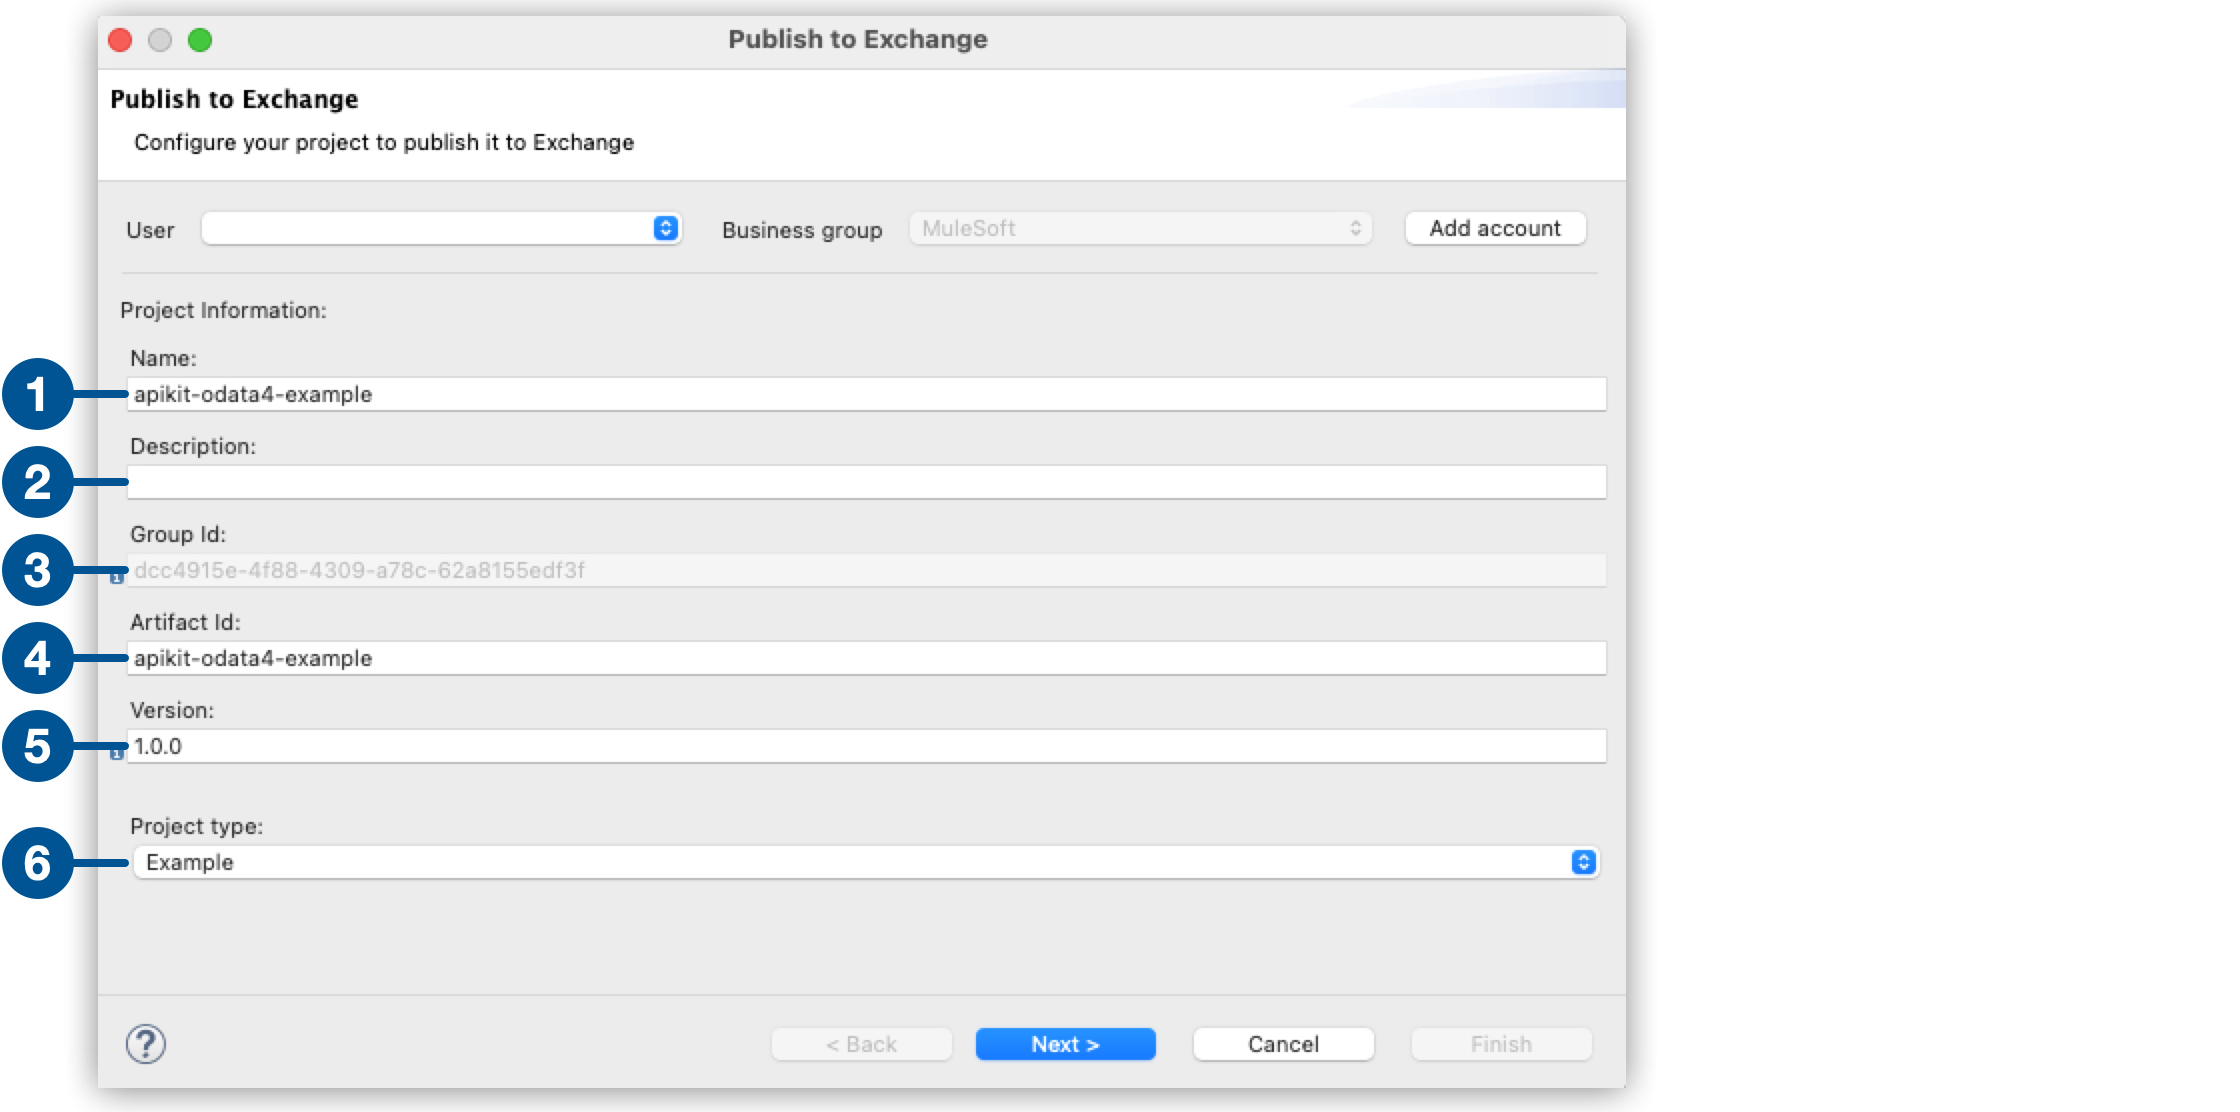 List of fields to configure before publishing an asset to Exchange.